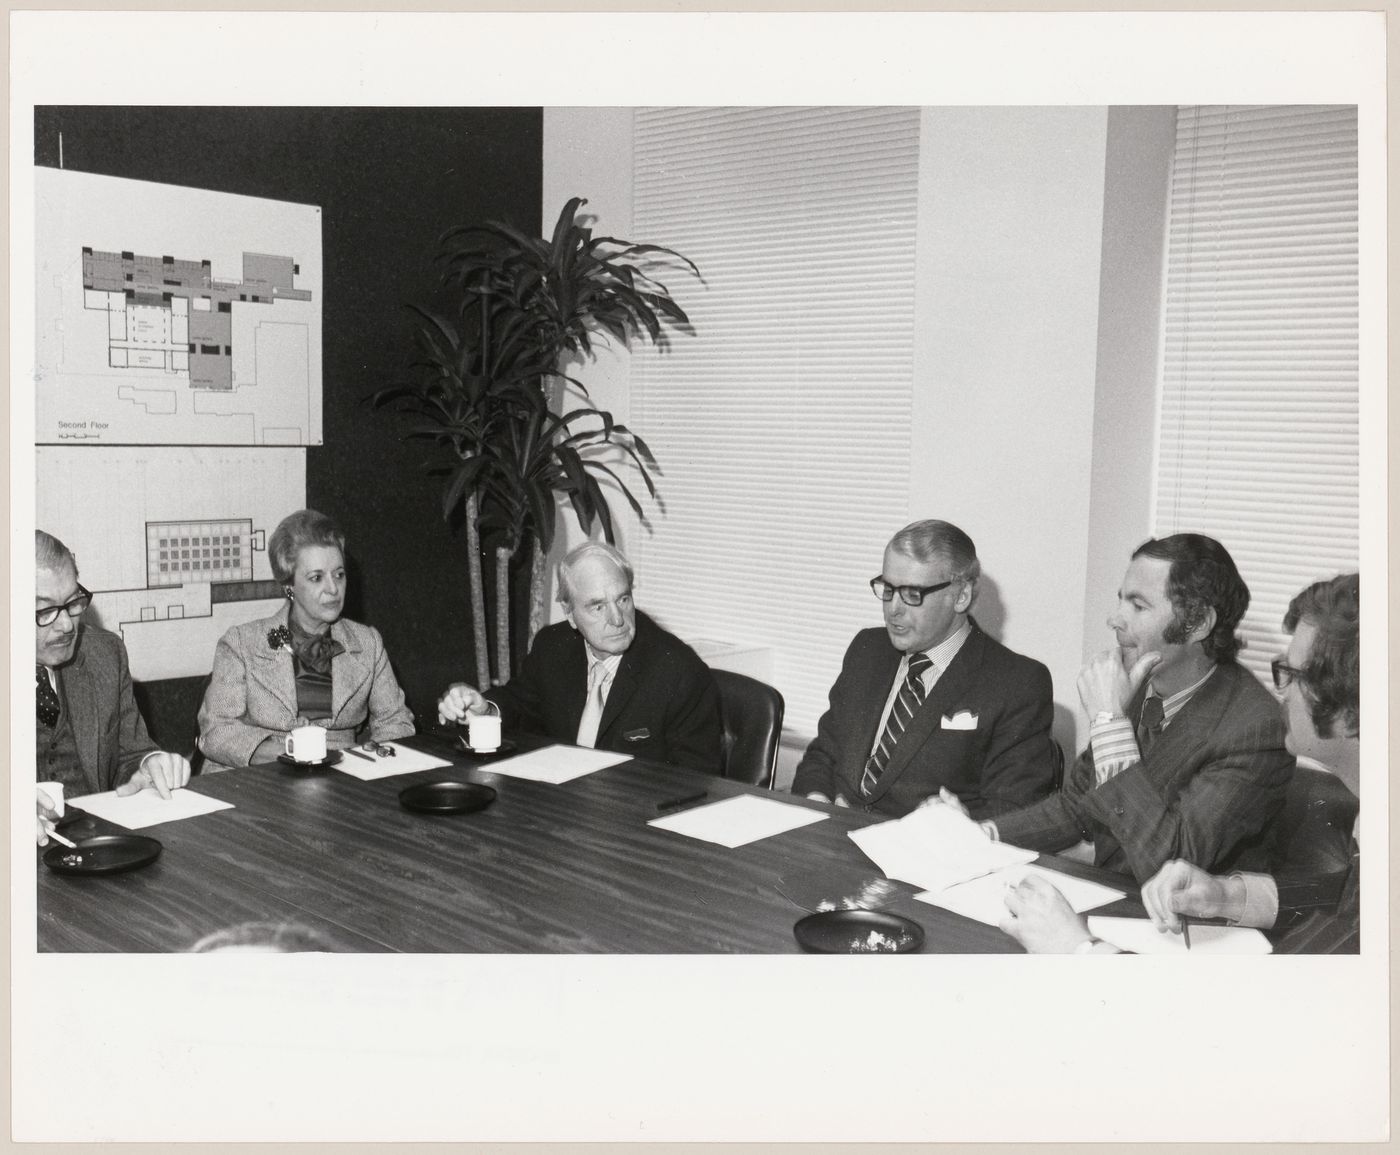 Parkin, Henry Moore and colleagues in meeting for Henry Moore Sculpture Centre project for Art Gallery Ontario, Toronto